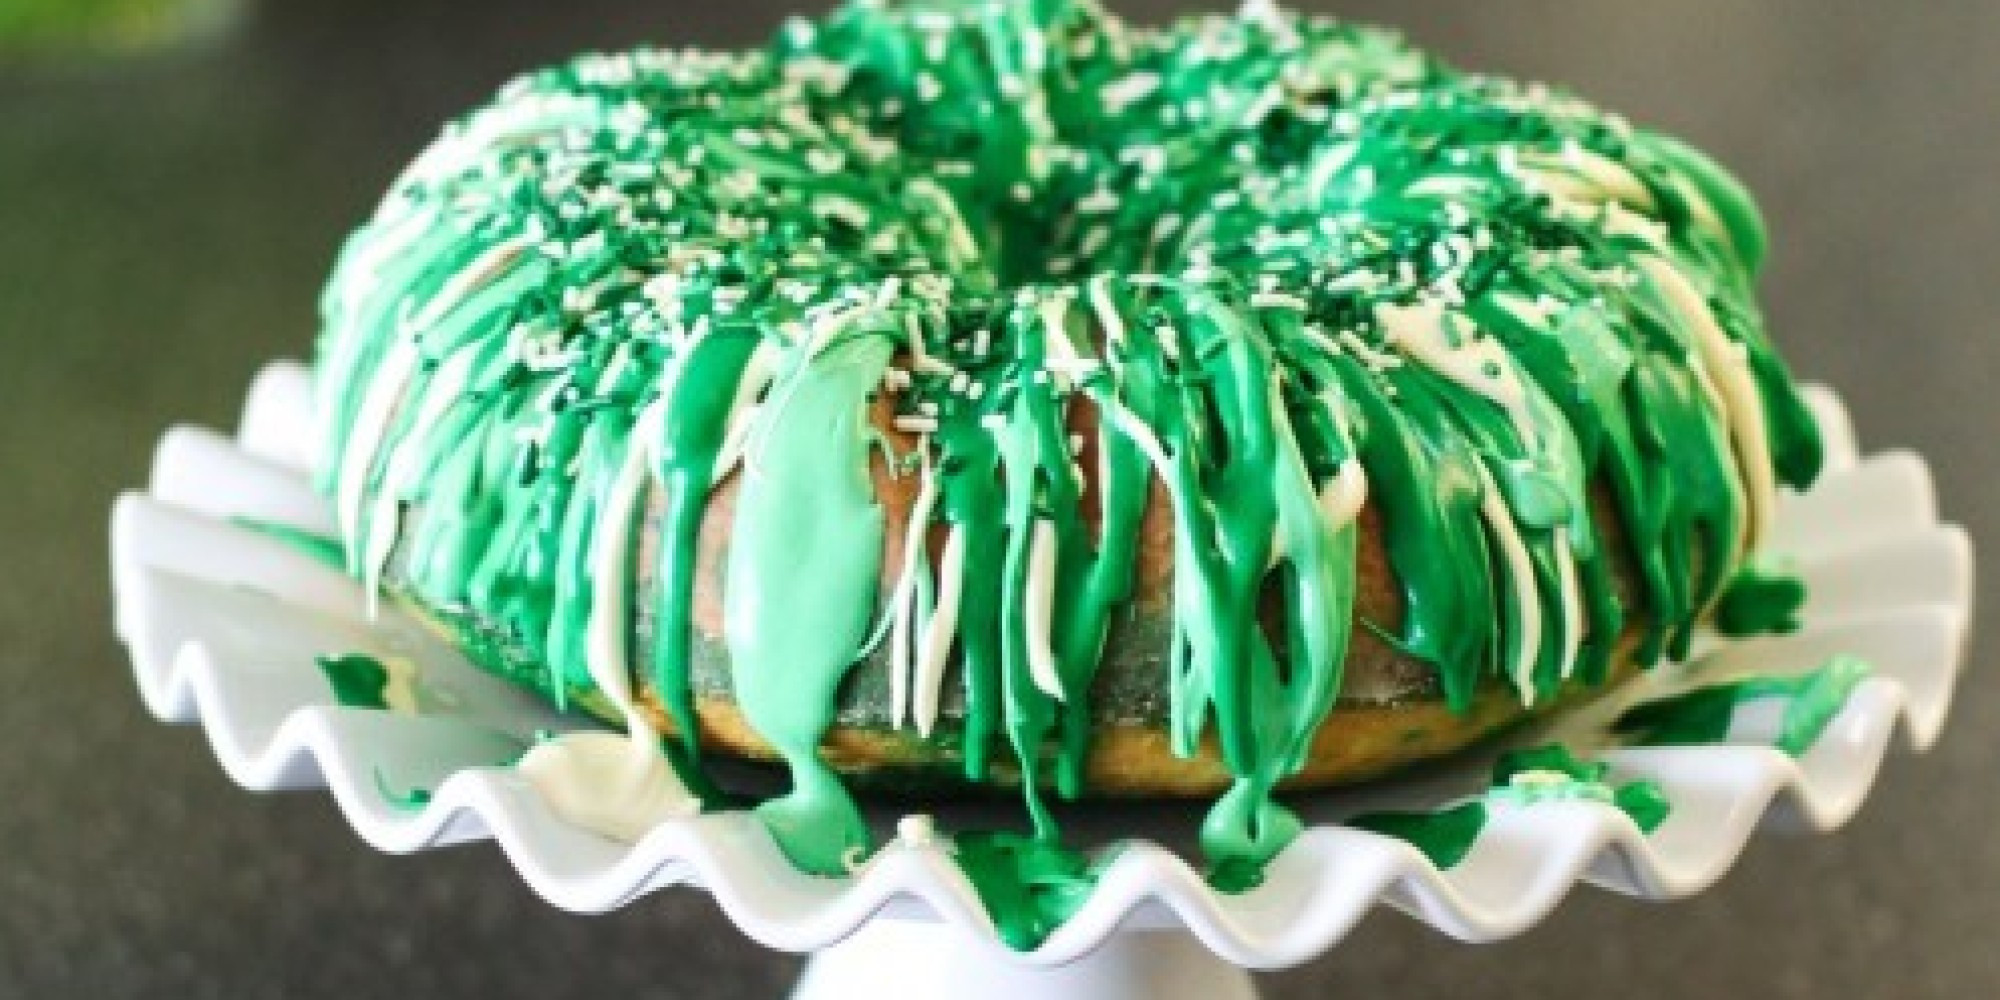 Green Desserts For St Patrick'S Day
 Green Dessert Recipes For St Patrick s Day PHOTOS